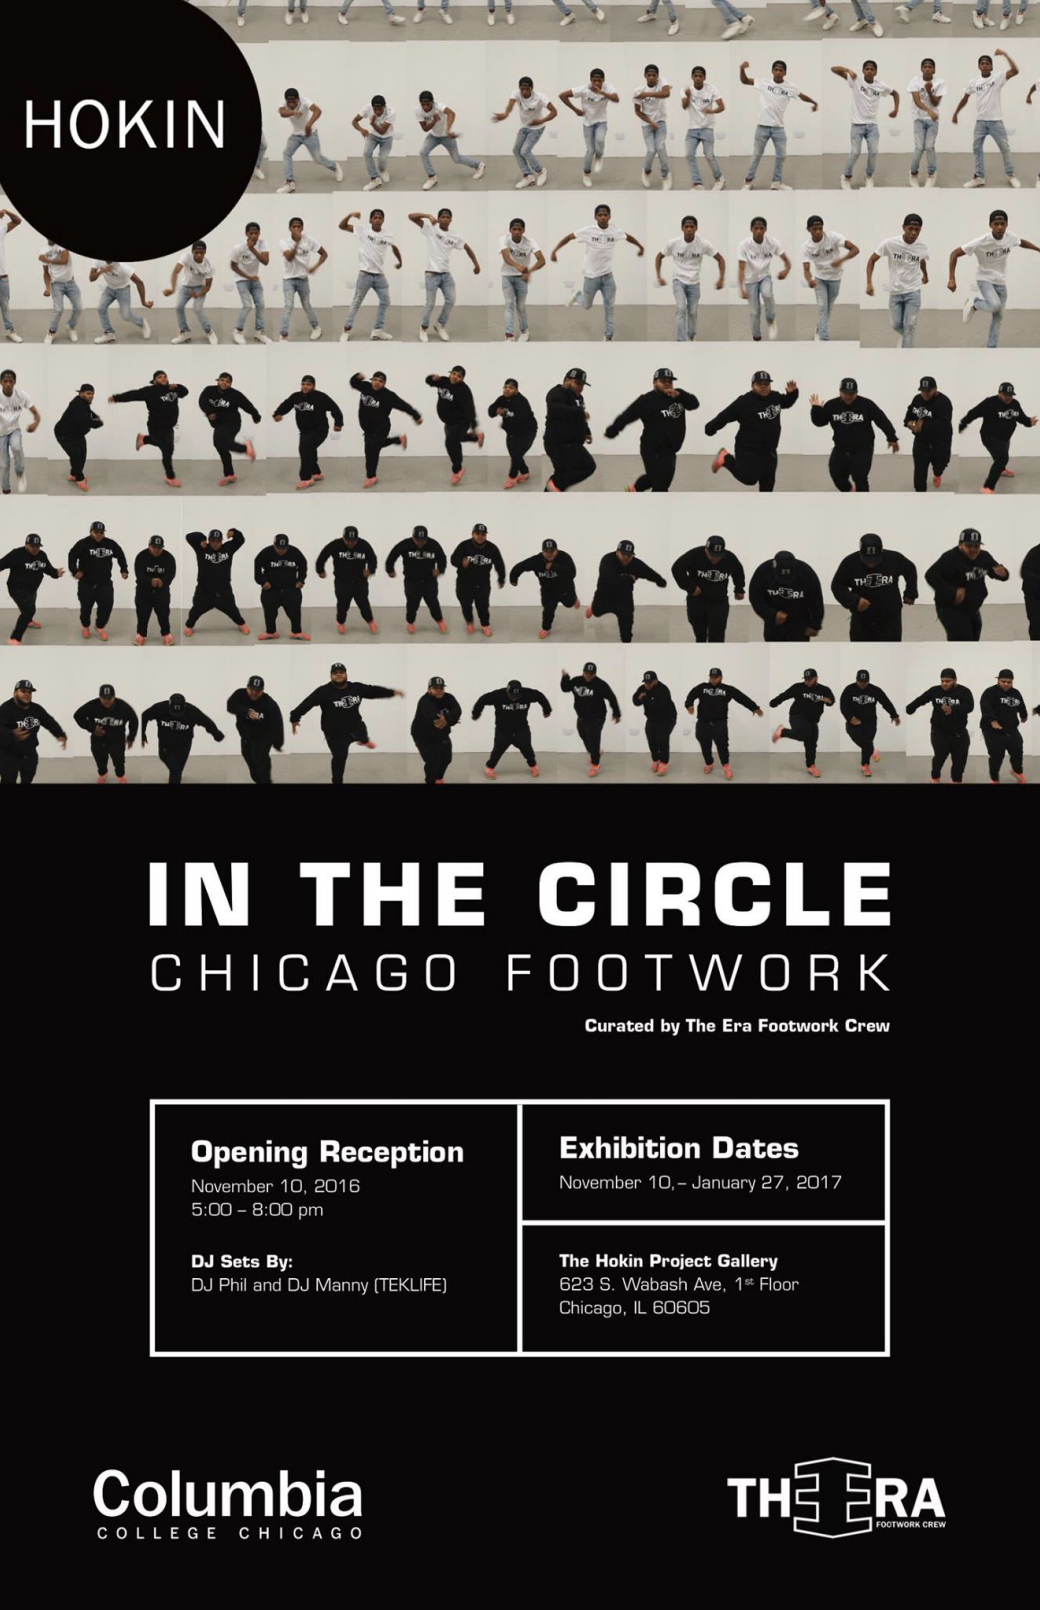 Art exhibition curated by The Era Footwork Crew